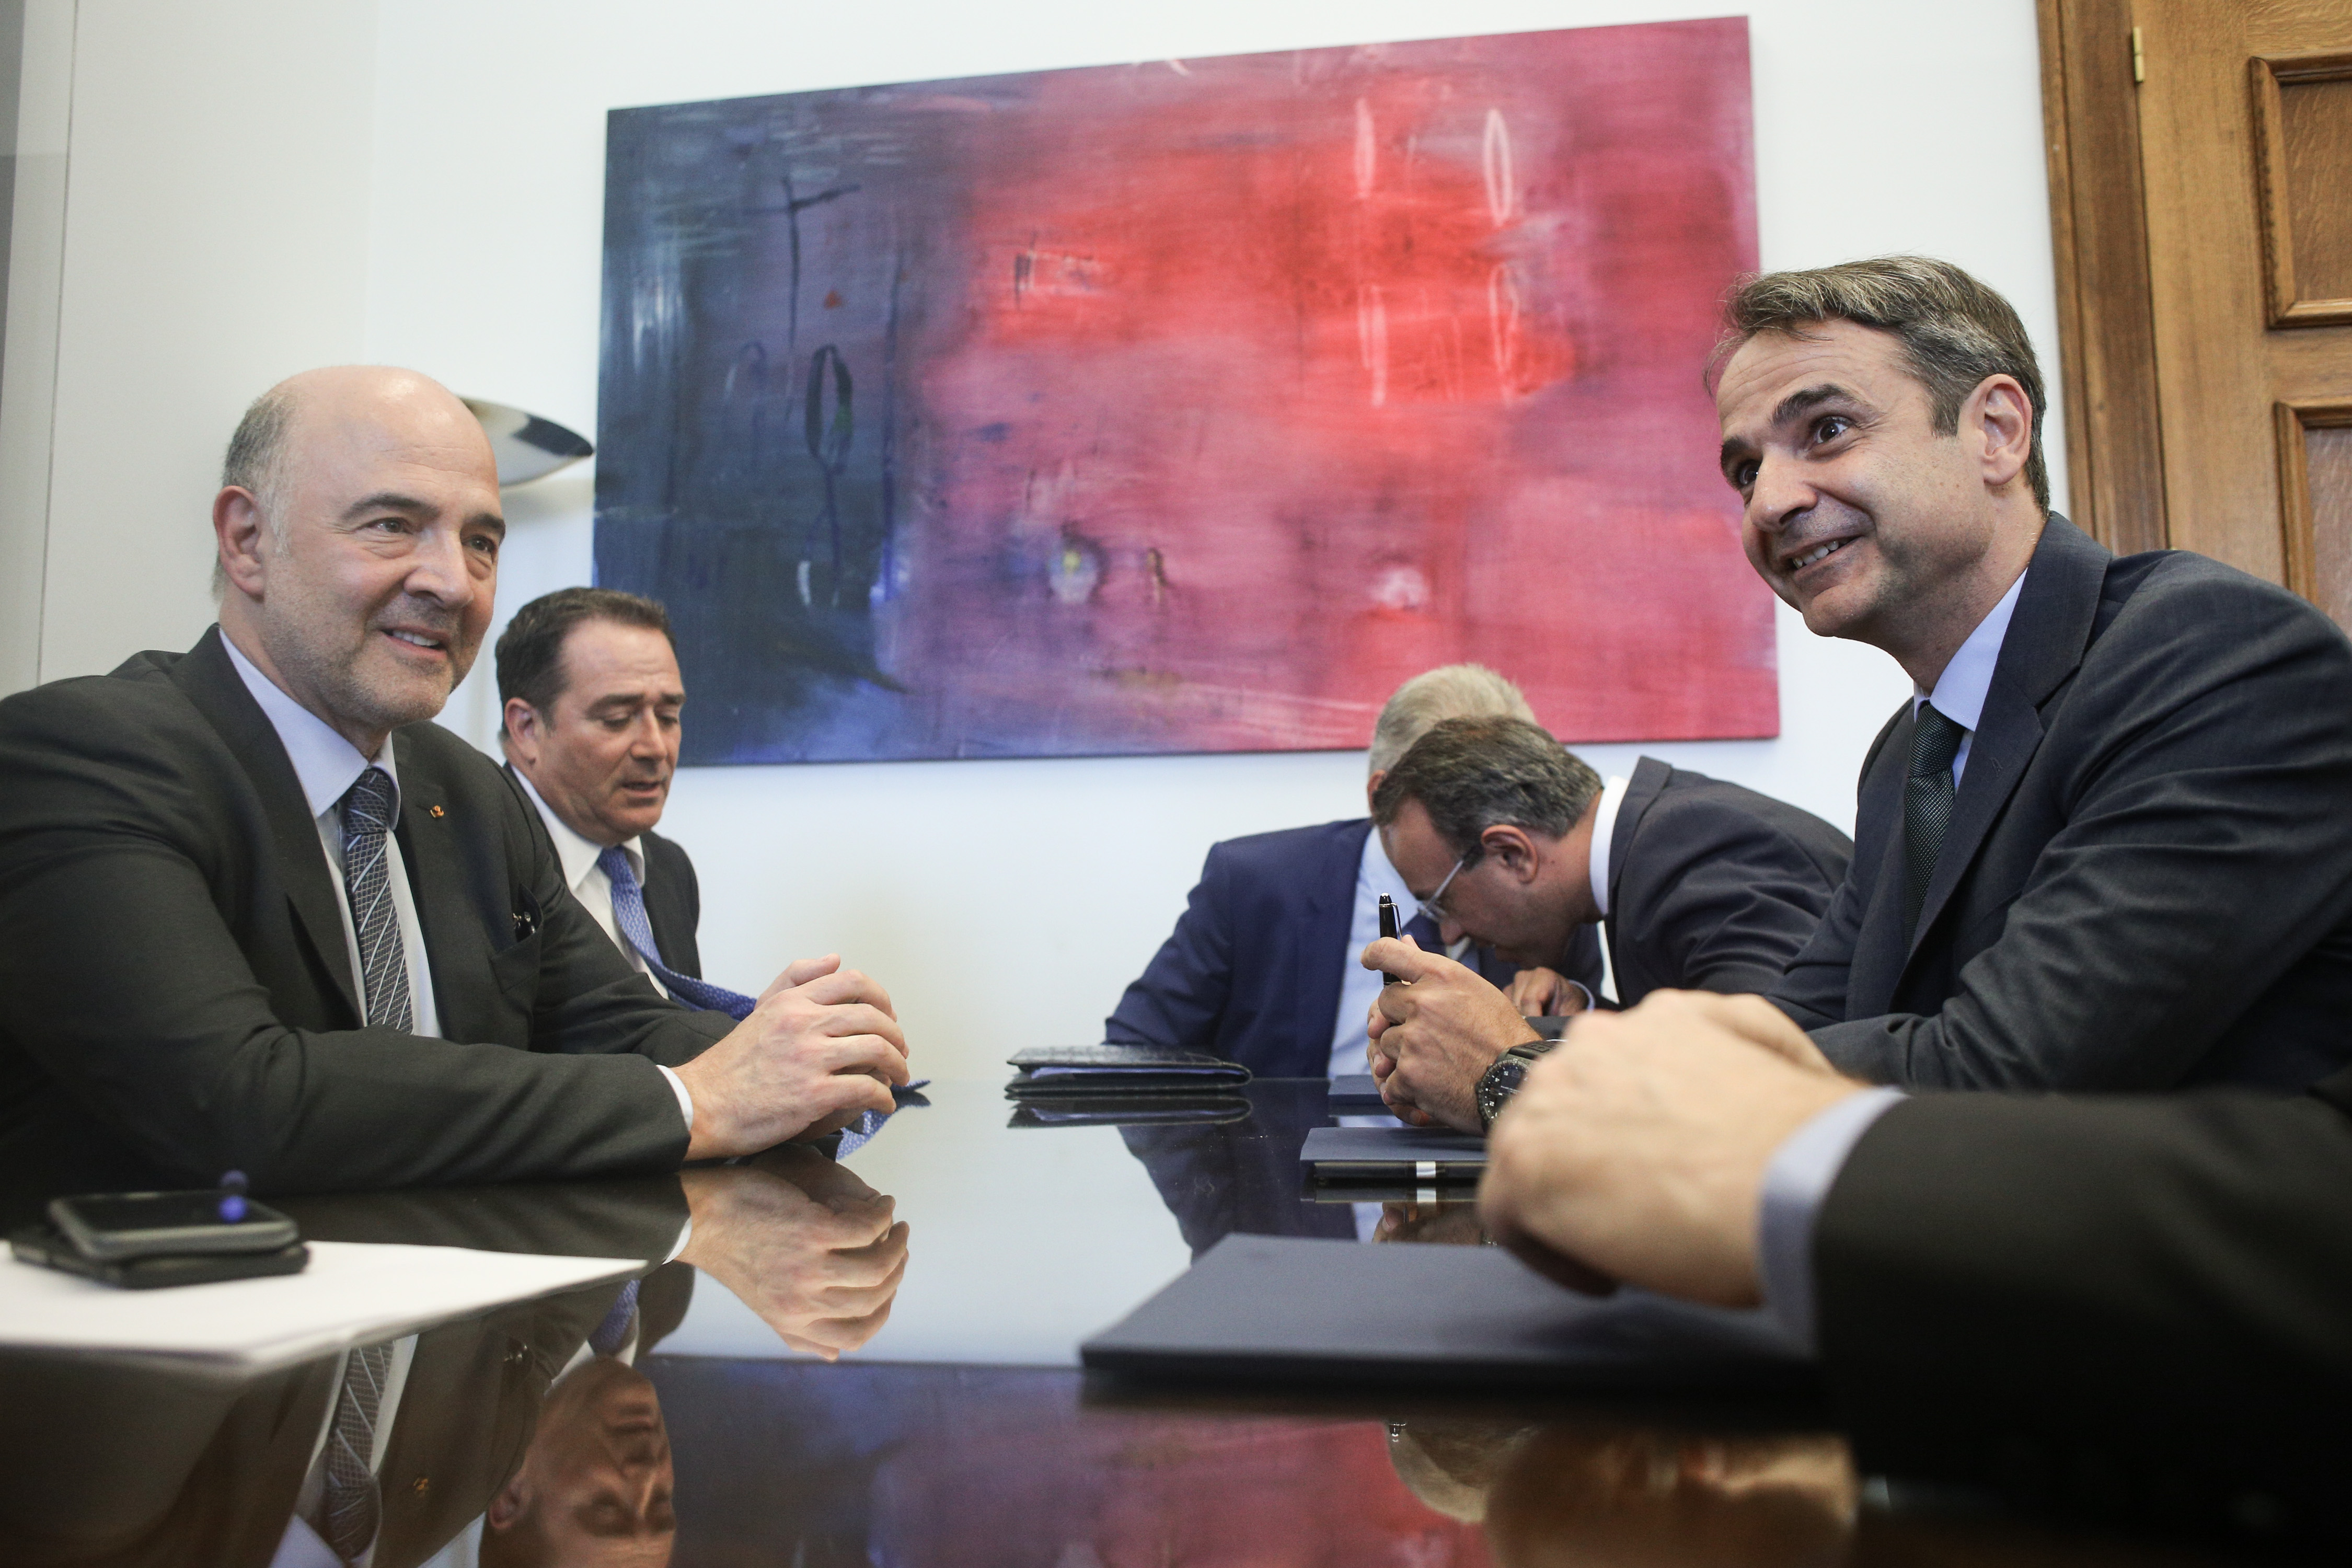 New Democracy peeved over Moscovici’s praise of government